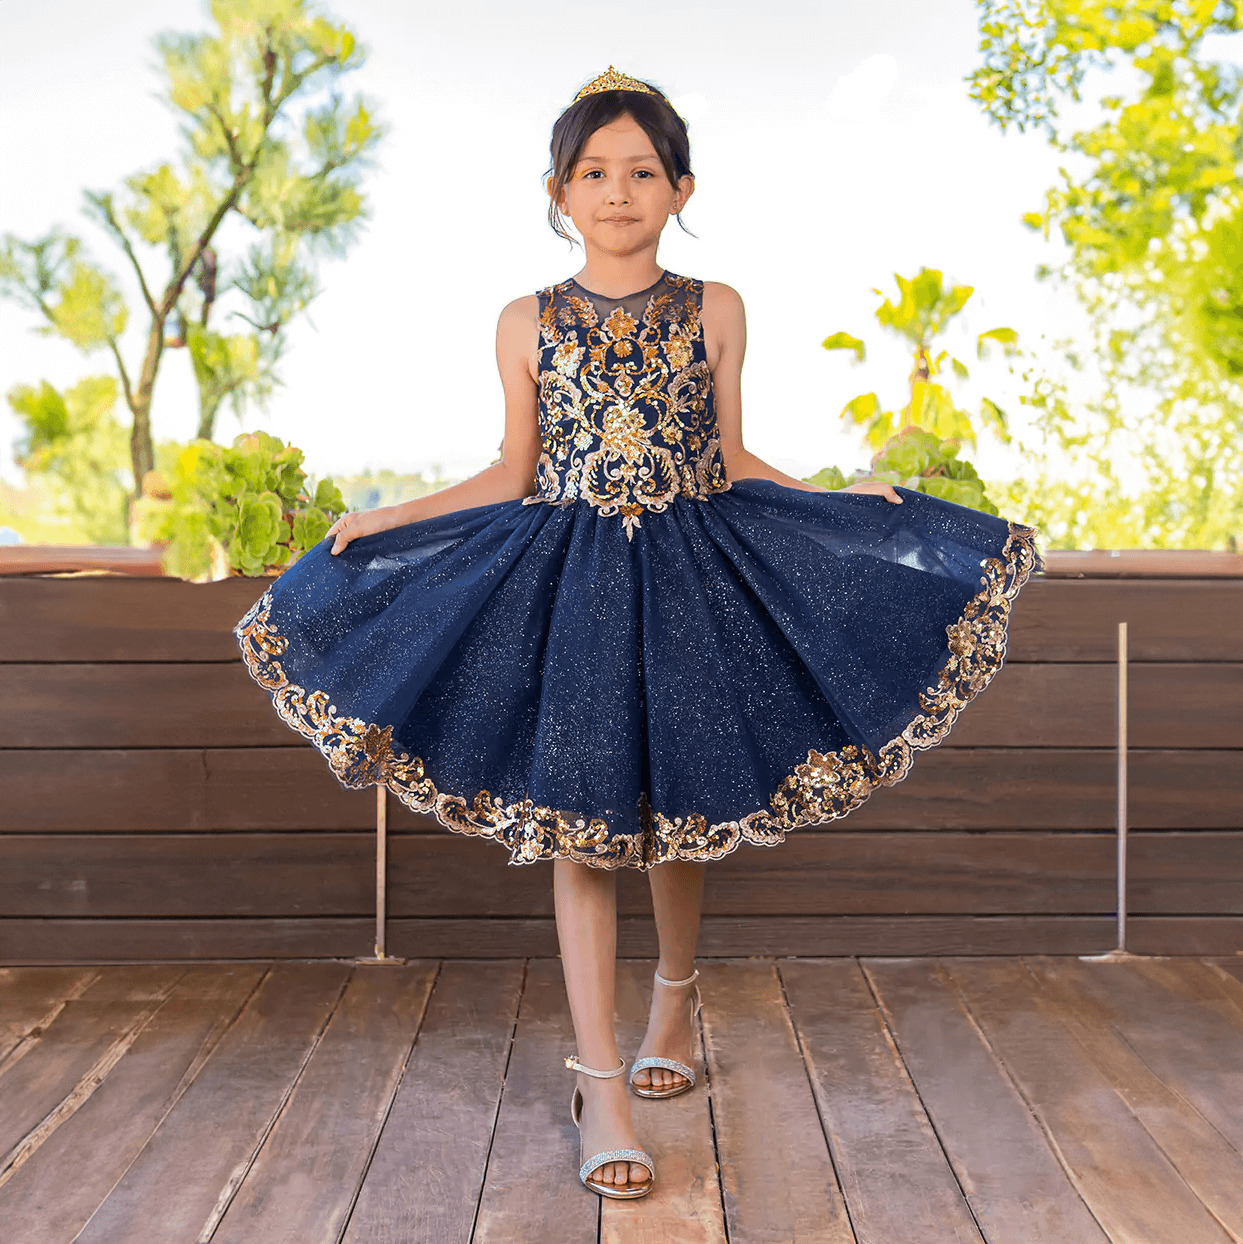 Girl in a crown wearing a beautiful navy and gold sequin dress